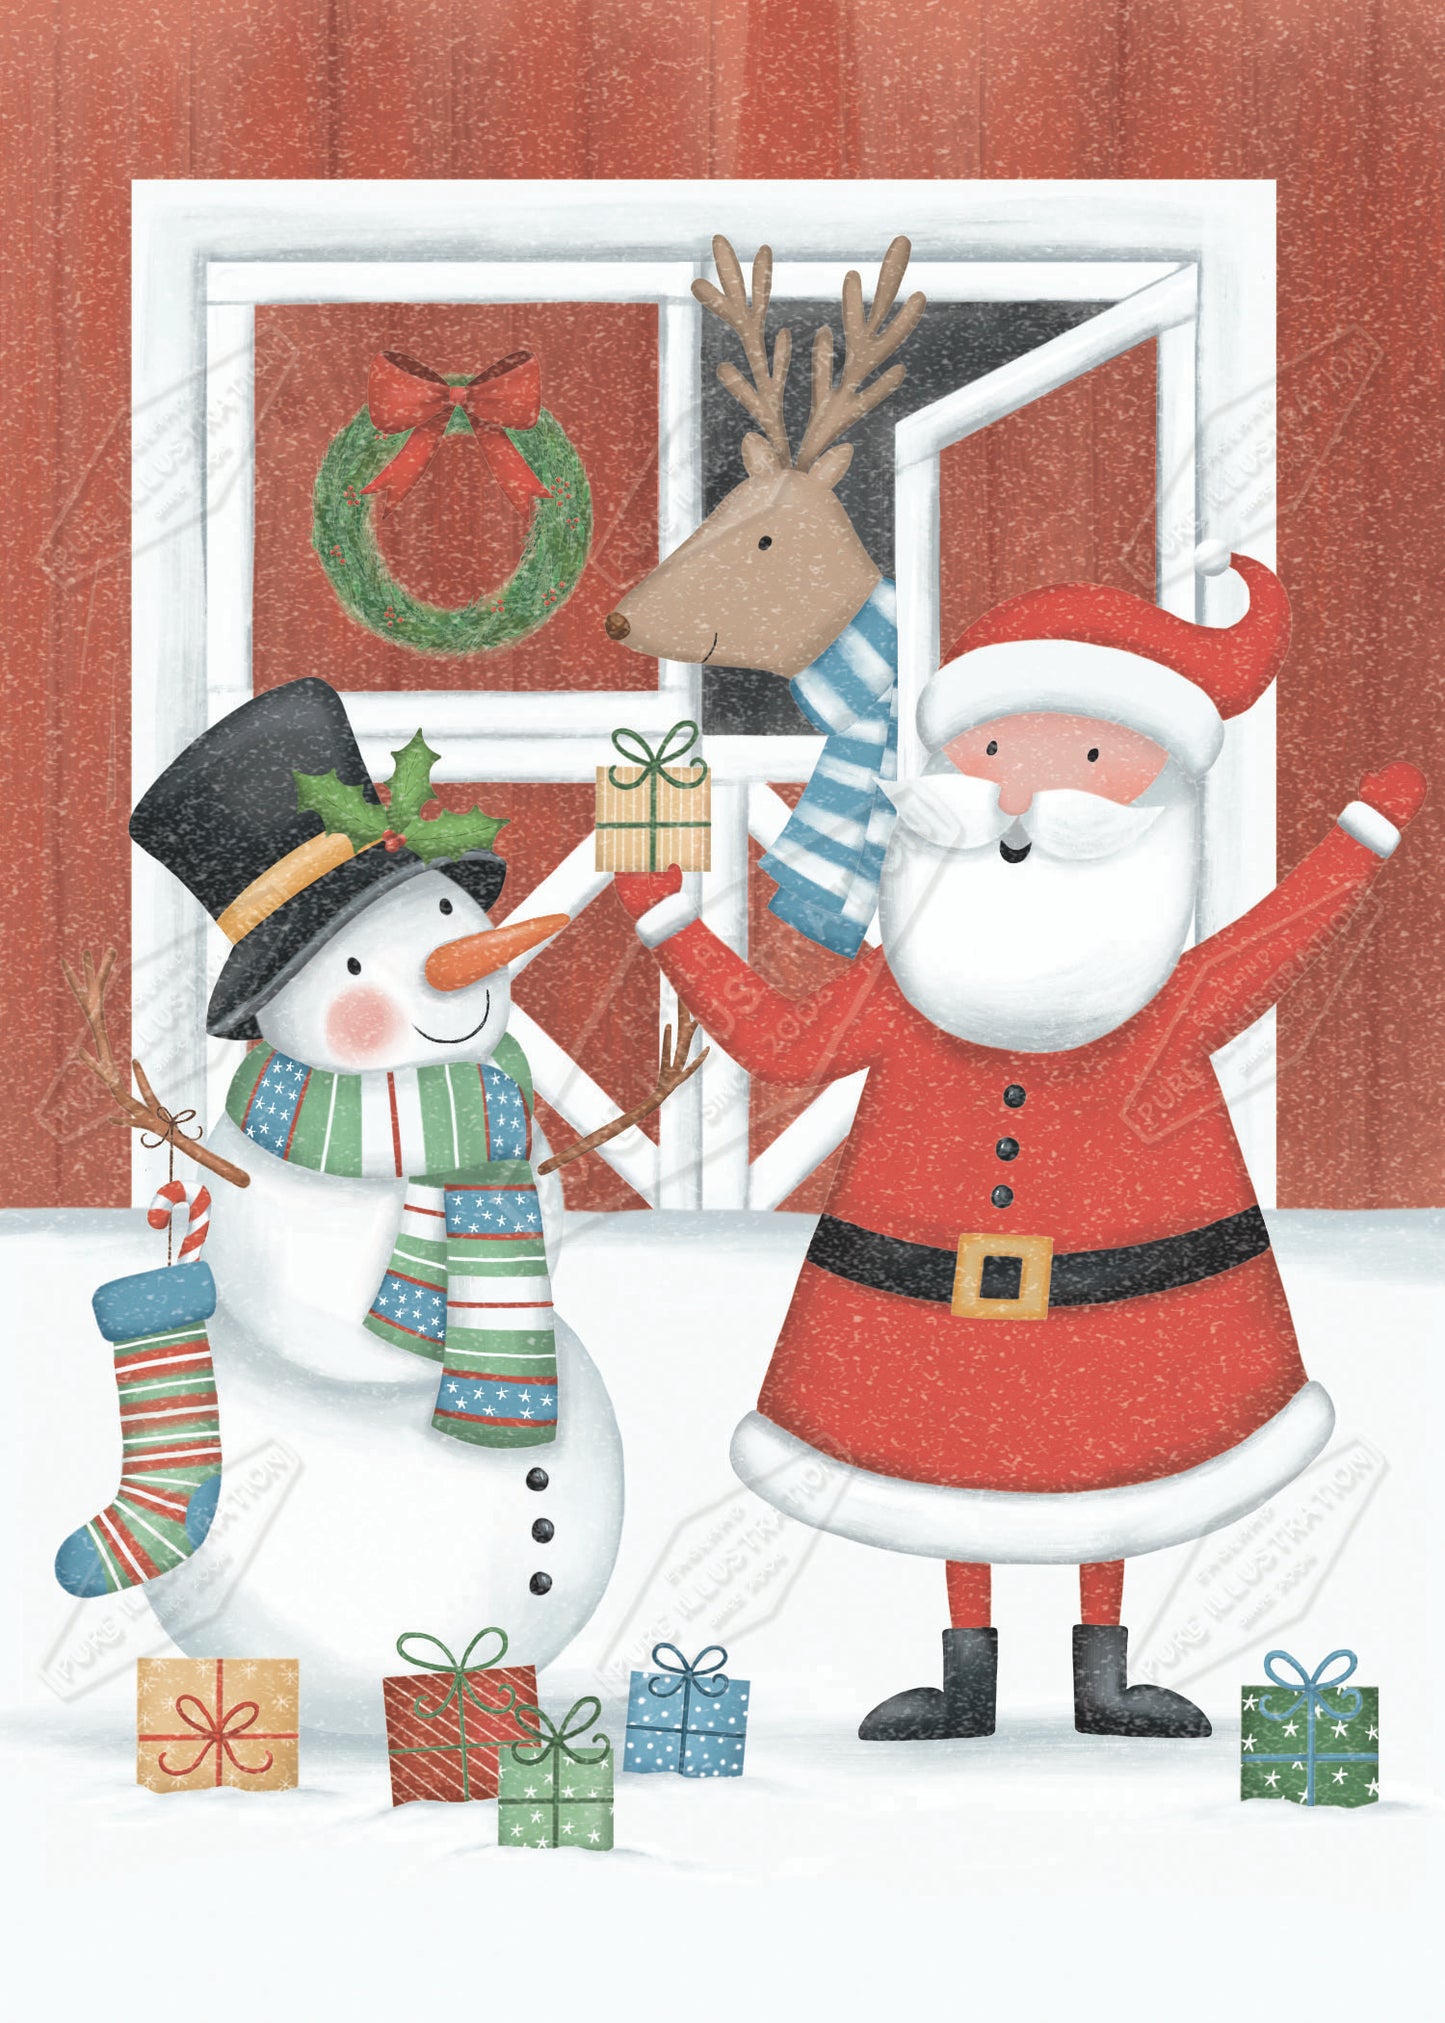 00035459AAI - Anna Aitken is represented by Pure Art Licensing Agency - Christmas Greeting Card Design